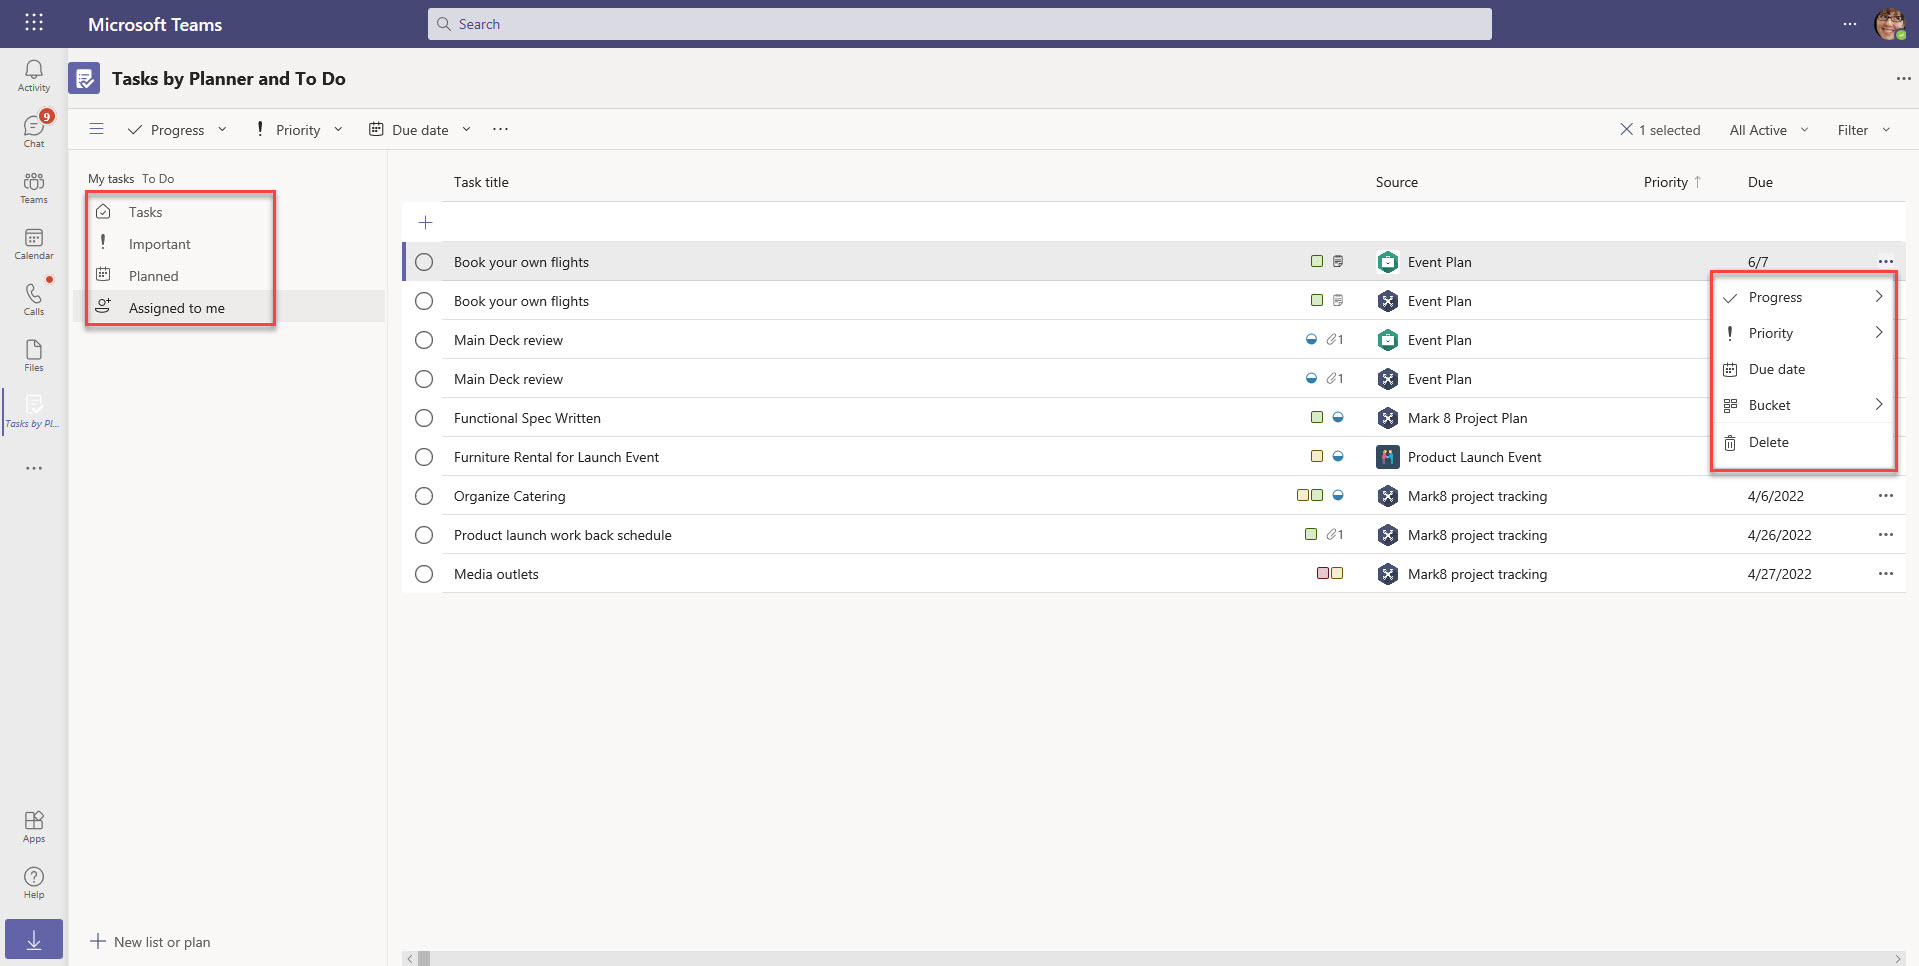 How to use Task by Planner in Microsoft Teams